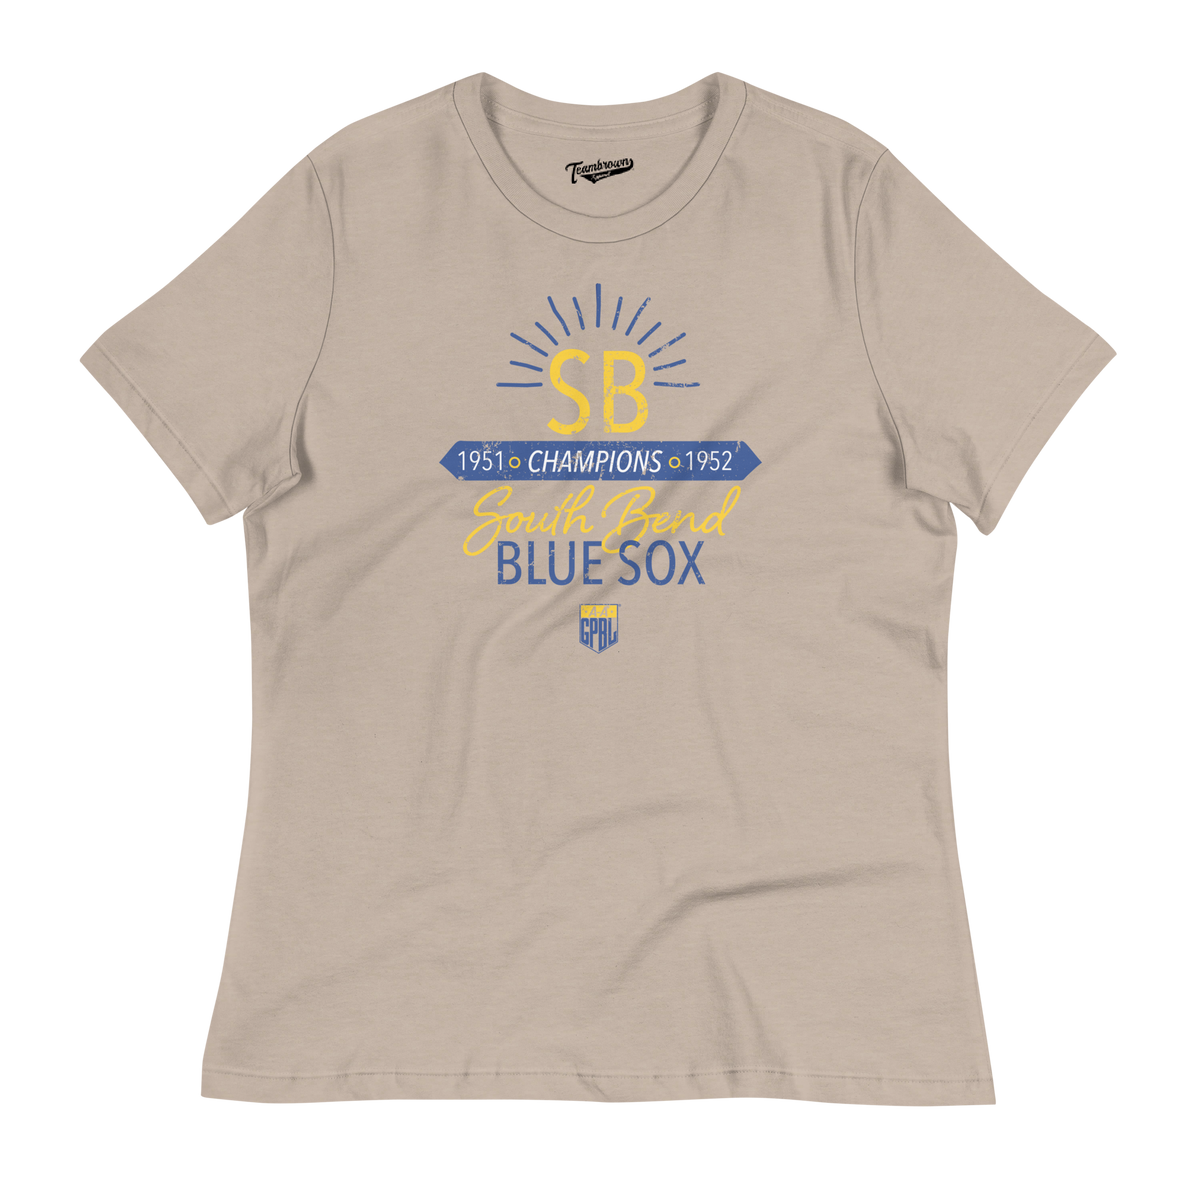 South Bend Blue Sox Champions - Women's Relaxed Fit T-Shirt | Officially Licensed - AAGPBL